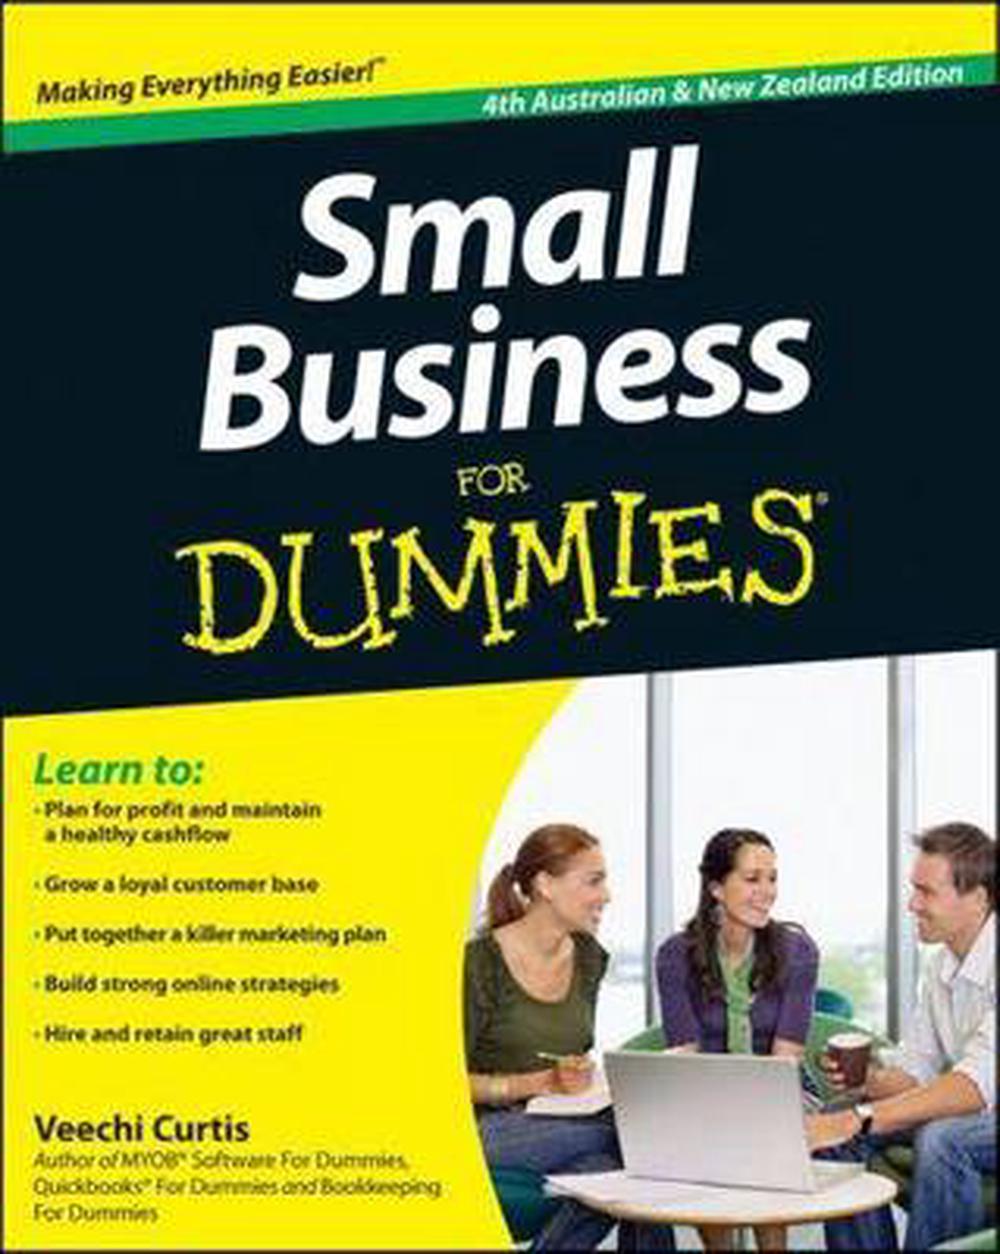 Small Business For Dummies by Veechi Curtis, Paperback, 9781118222805